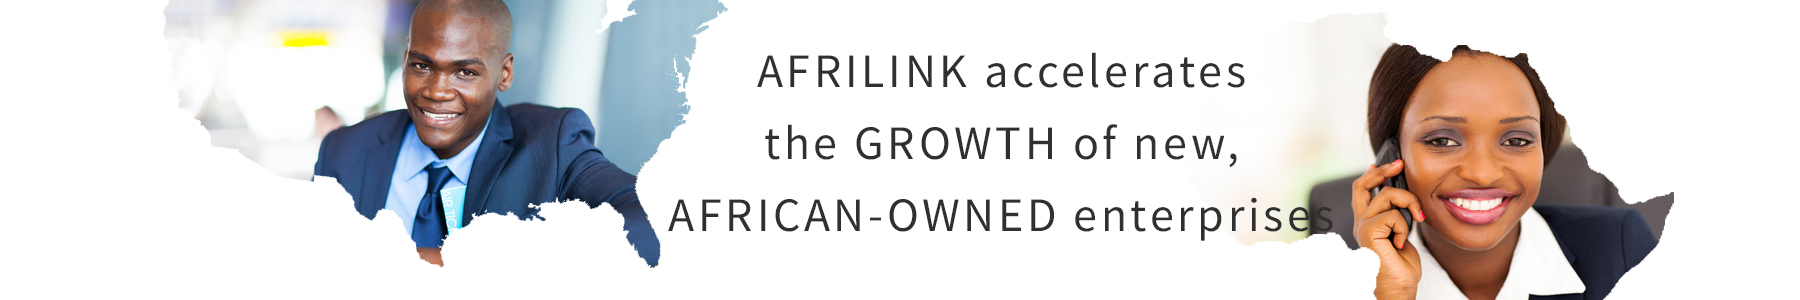 Afrilink - Growth of new African-owned enterprise